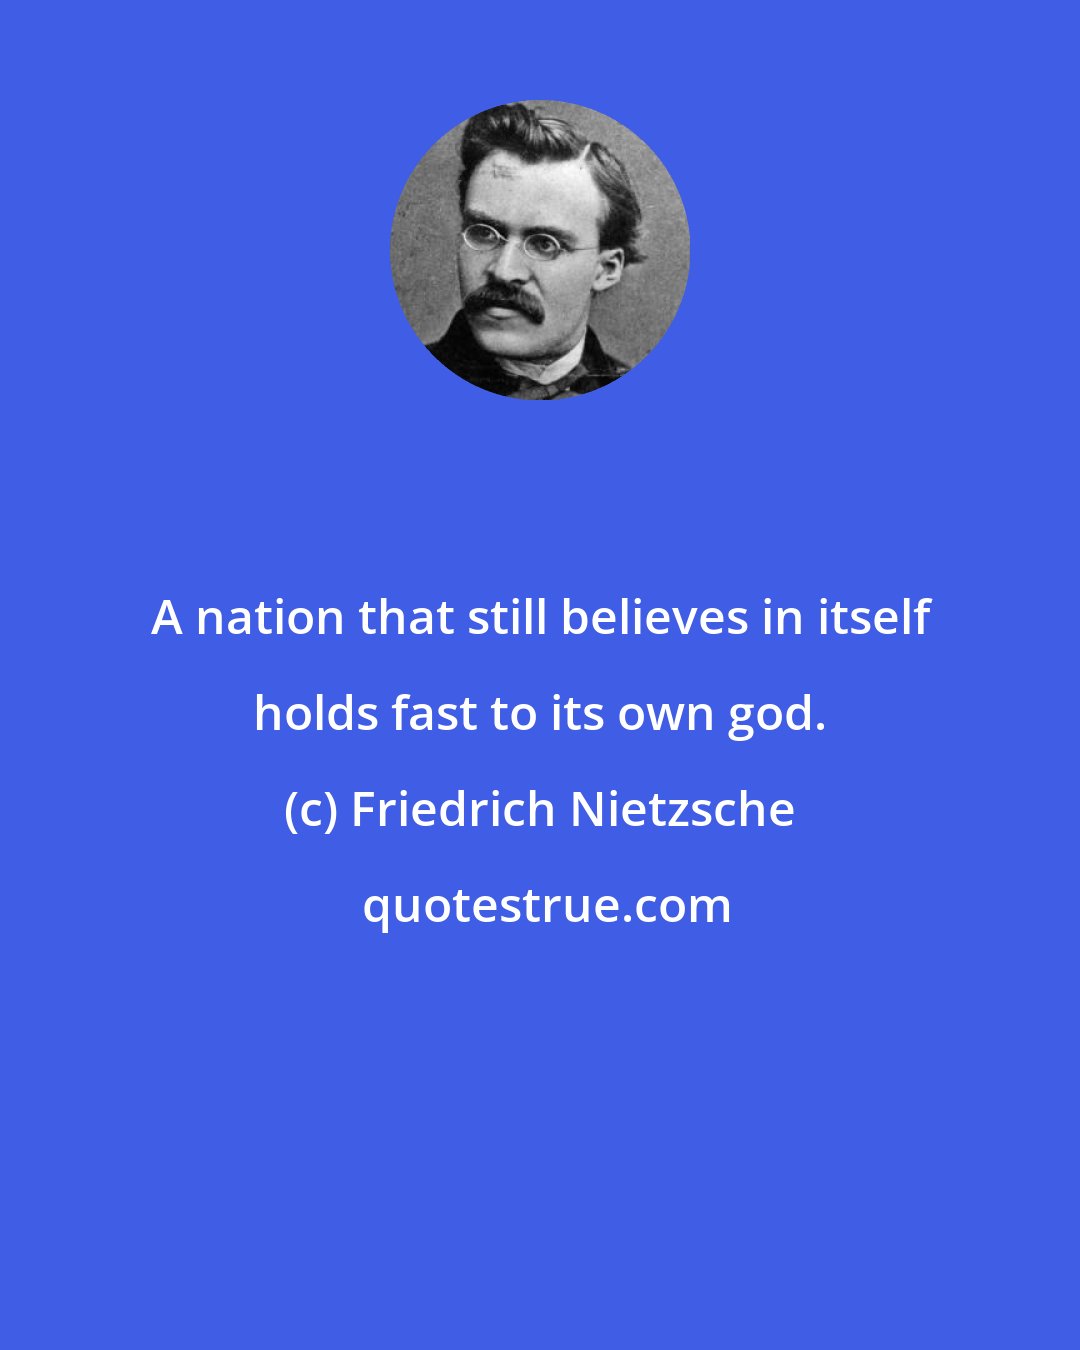 Friedrich Nietzsche: A nation that still believes in itself holds fast to its own god.